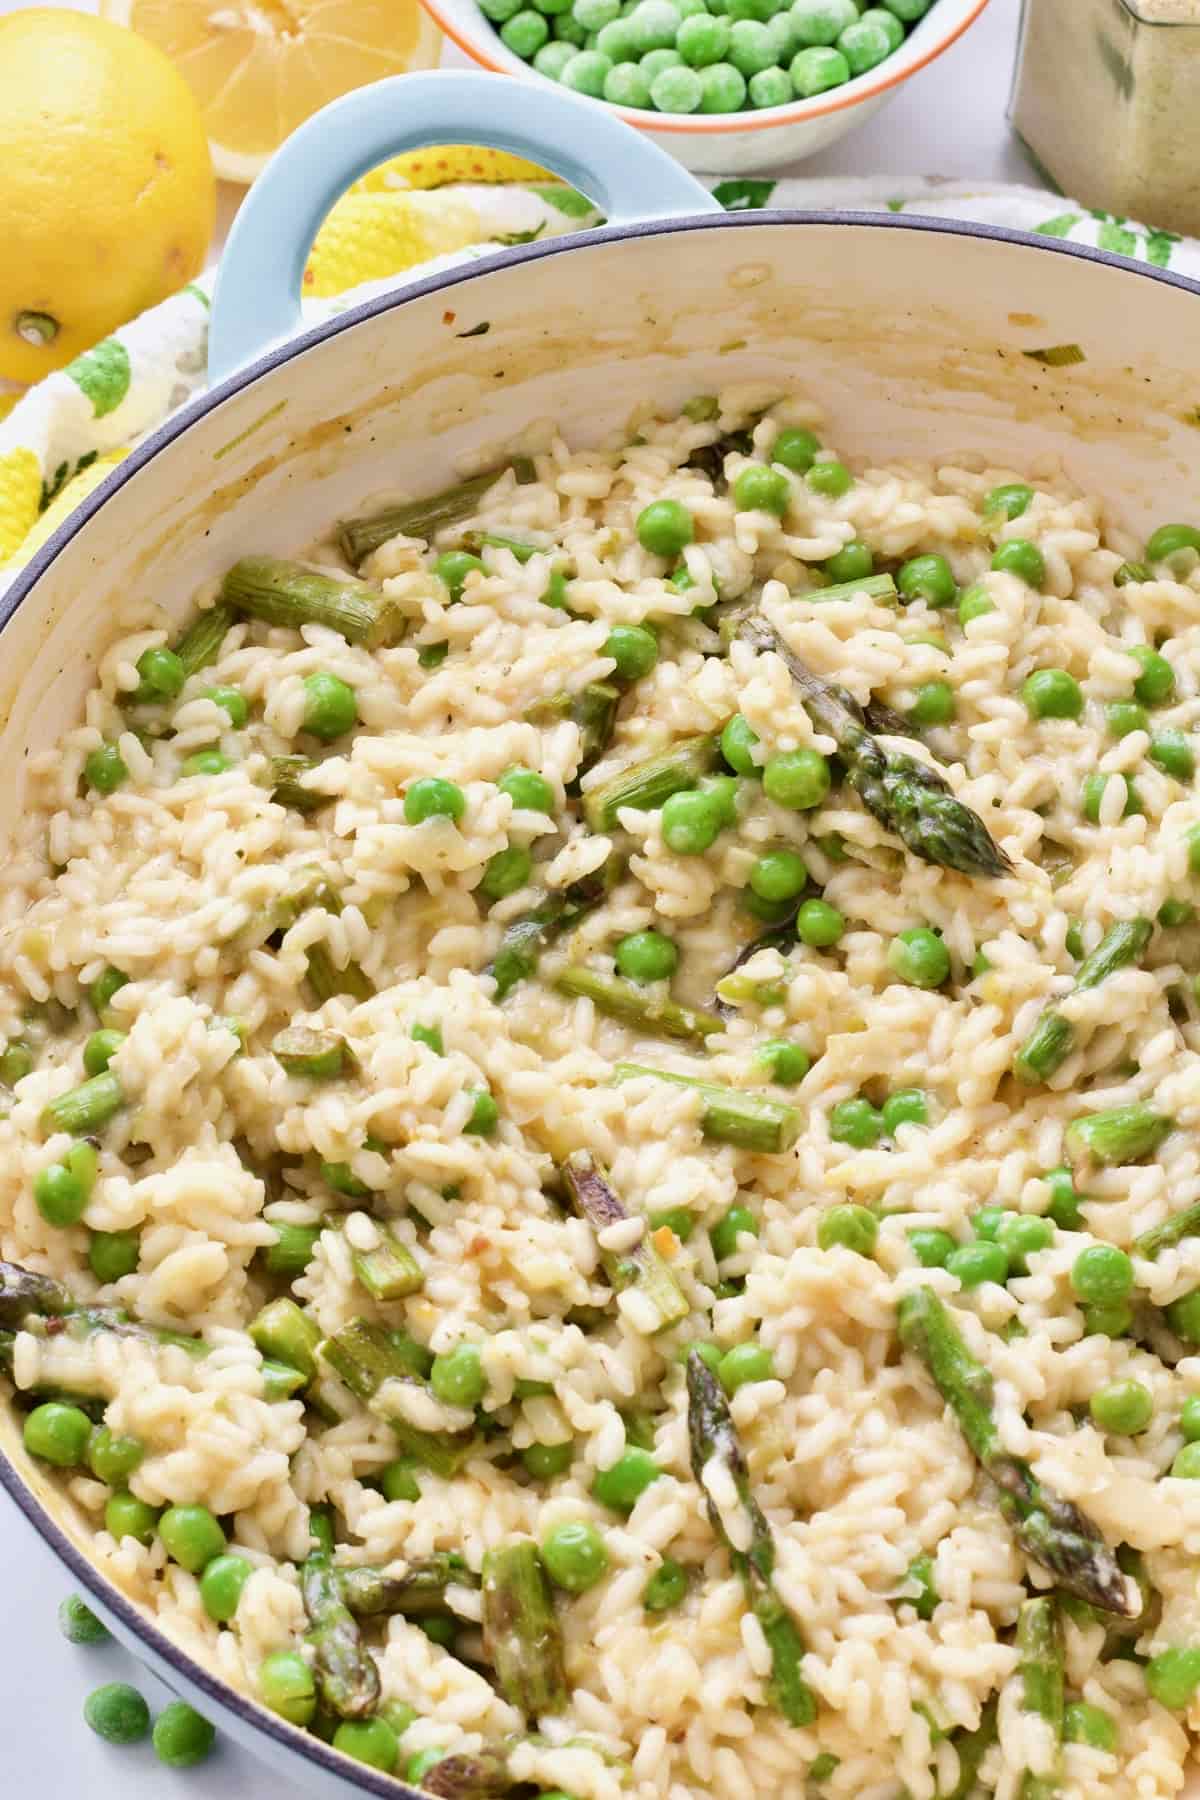 Pan full of pea and asparagus risotto.